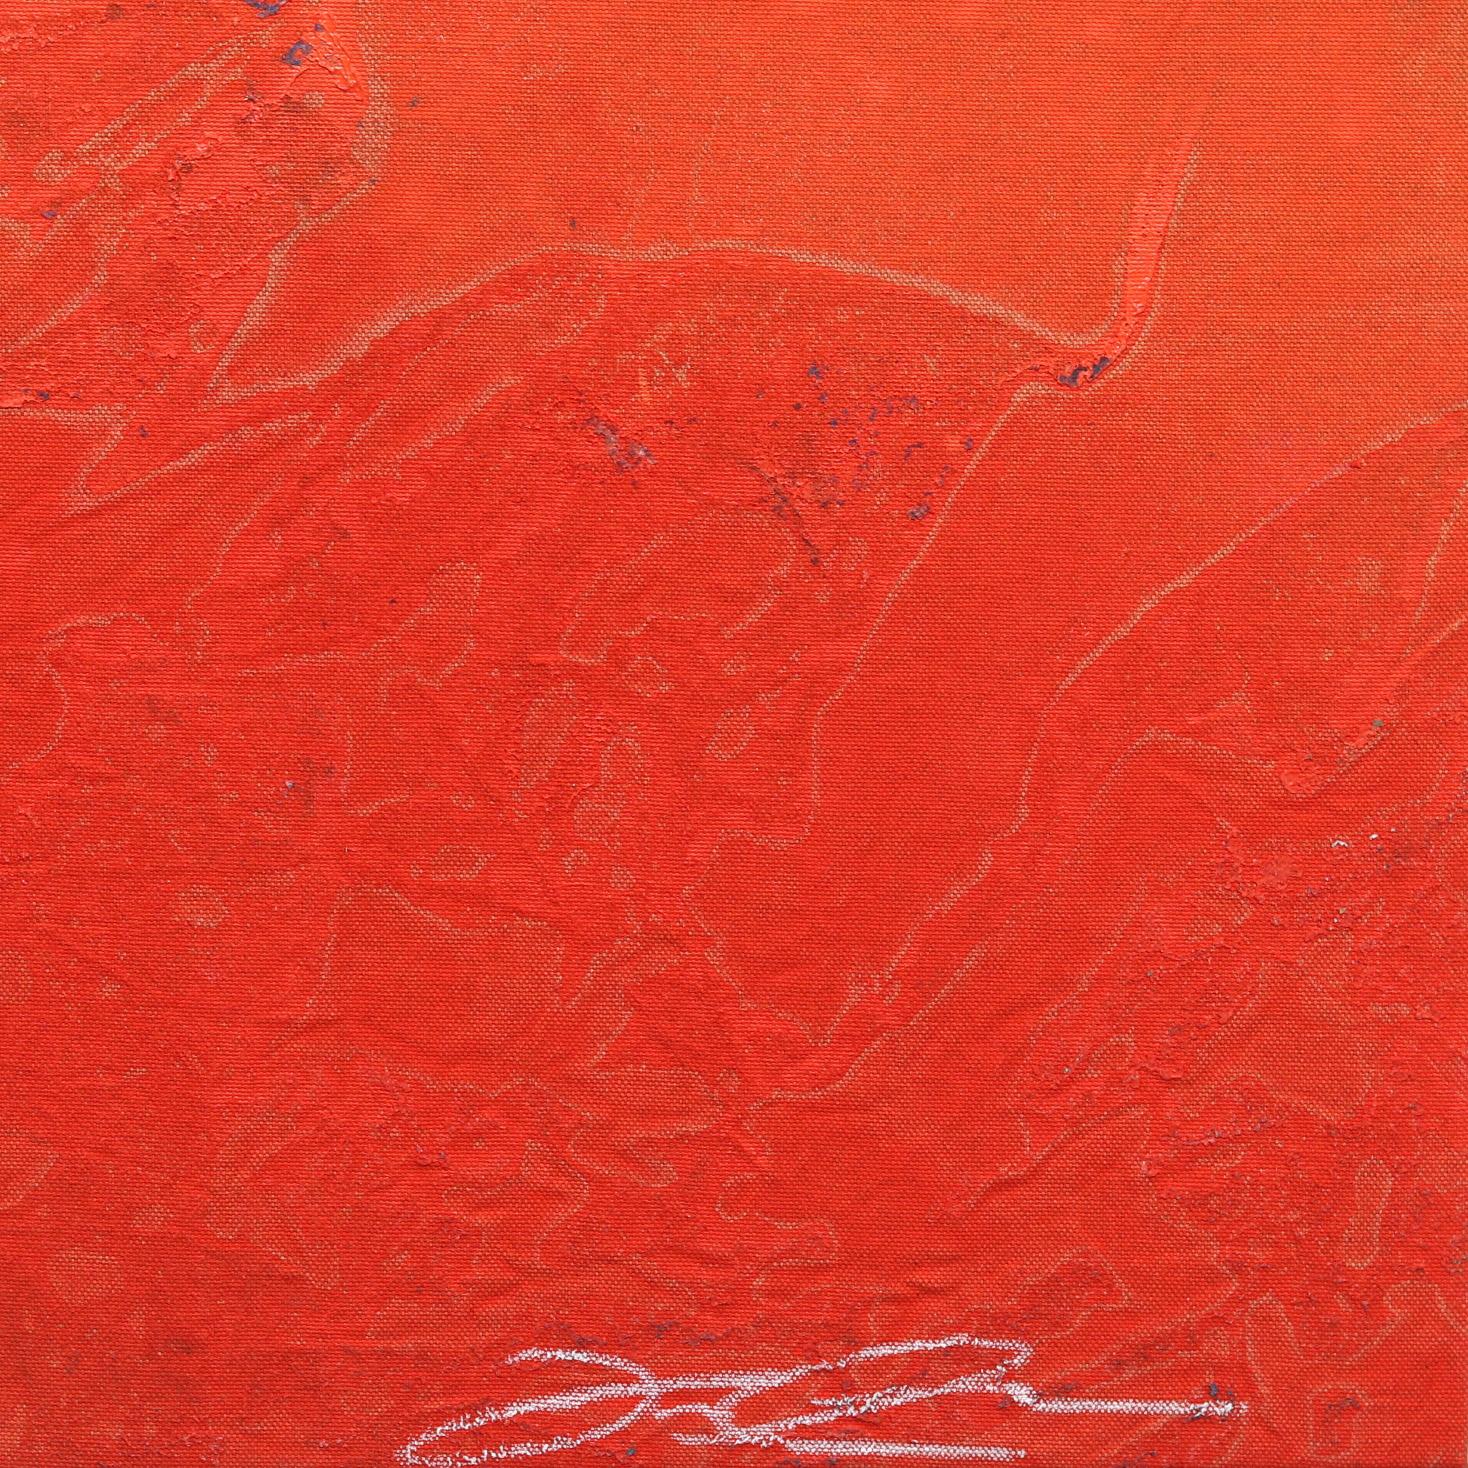 Concrete Sunset 2 - Bold Meditative Gold Leaf Red Painting on Linen Canvas For Sale 5